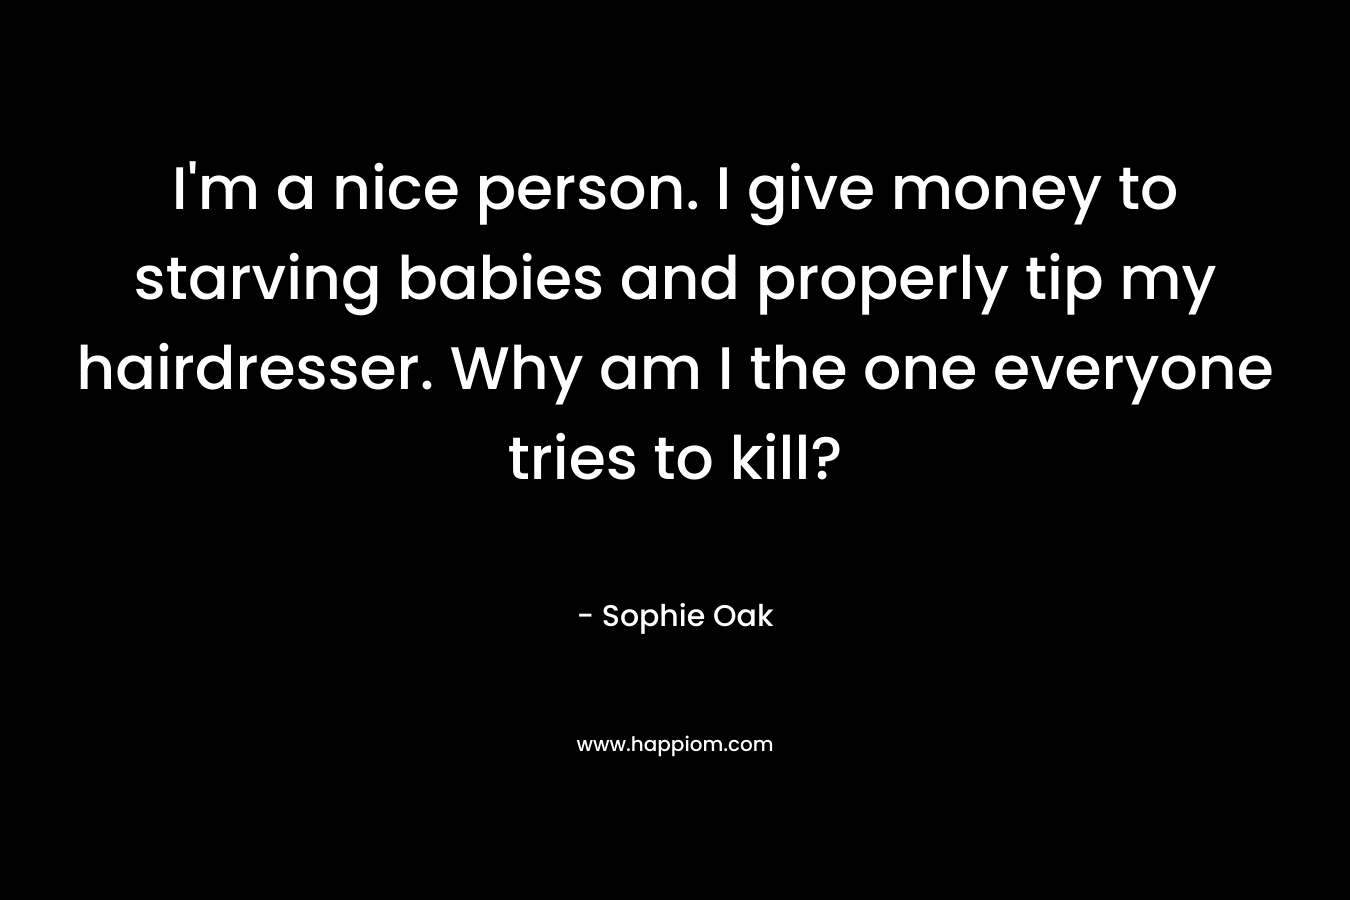 I'm a nice person. I give money to starving babies and properly tip my hairdresser. Why am I the one everyone tries to kill?